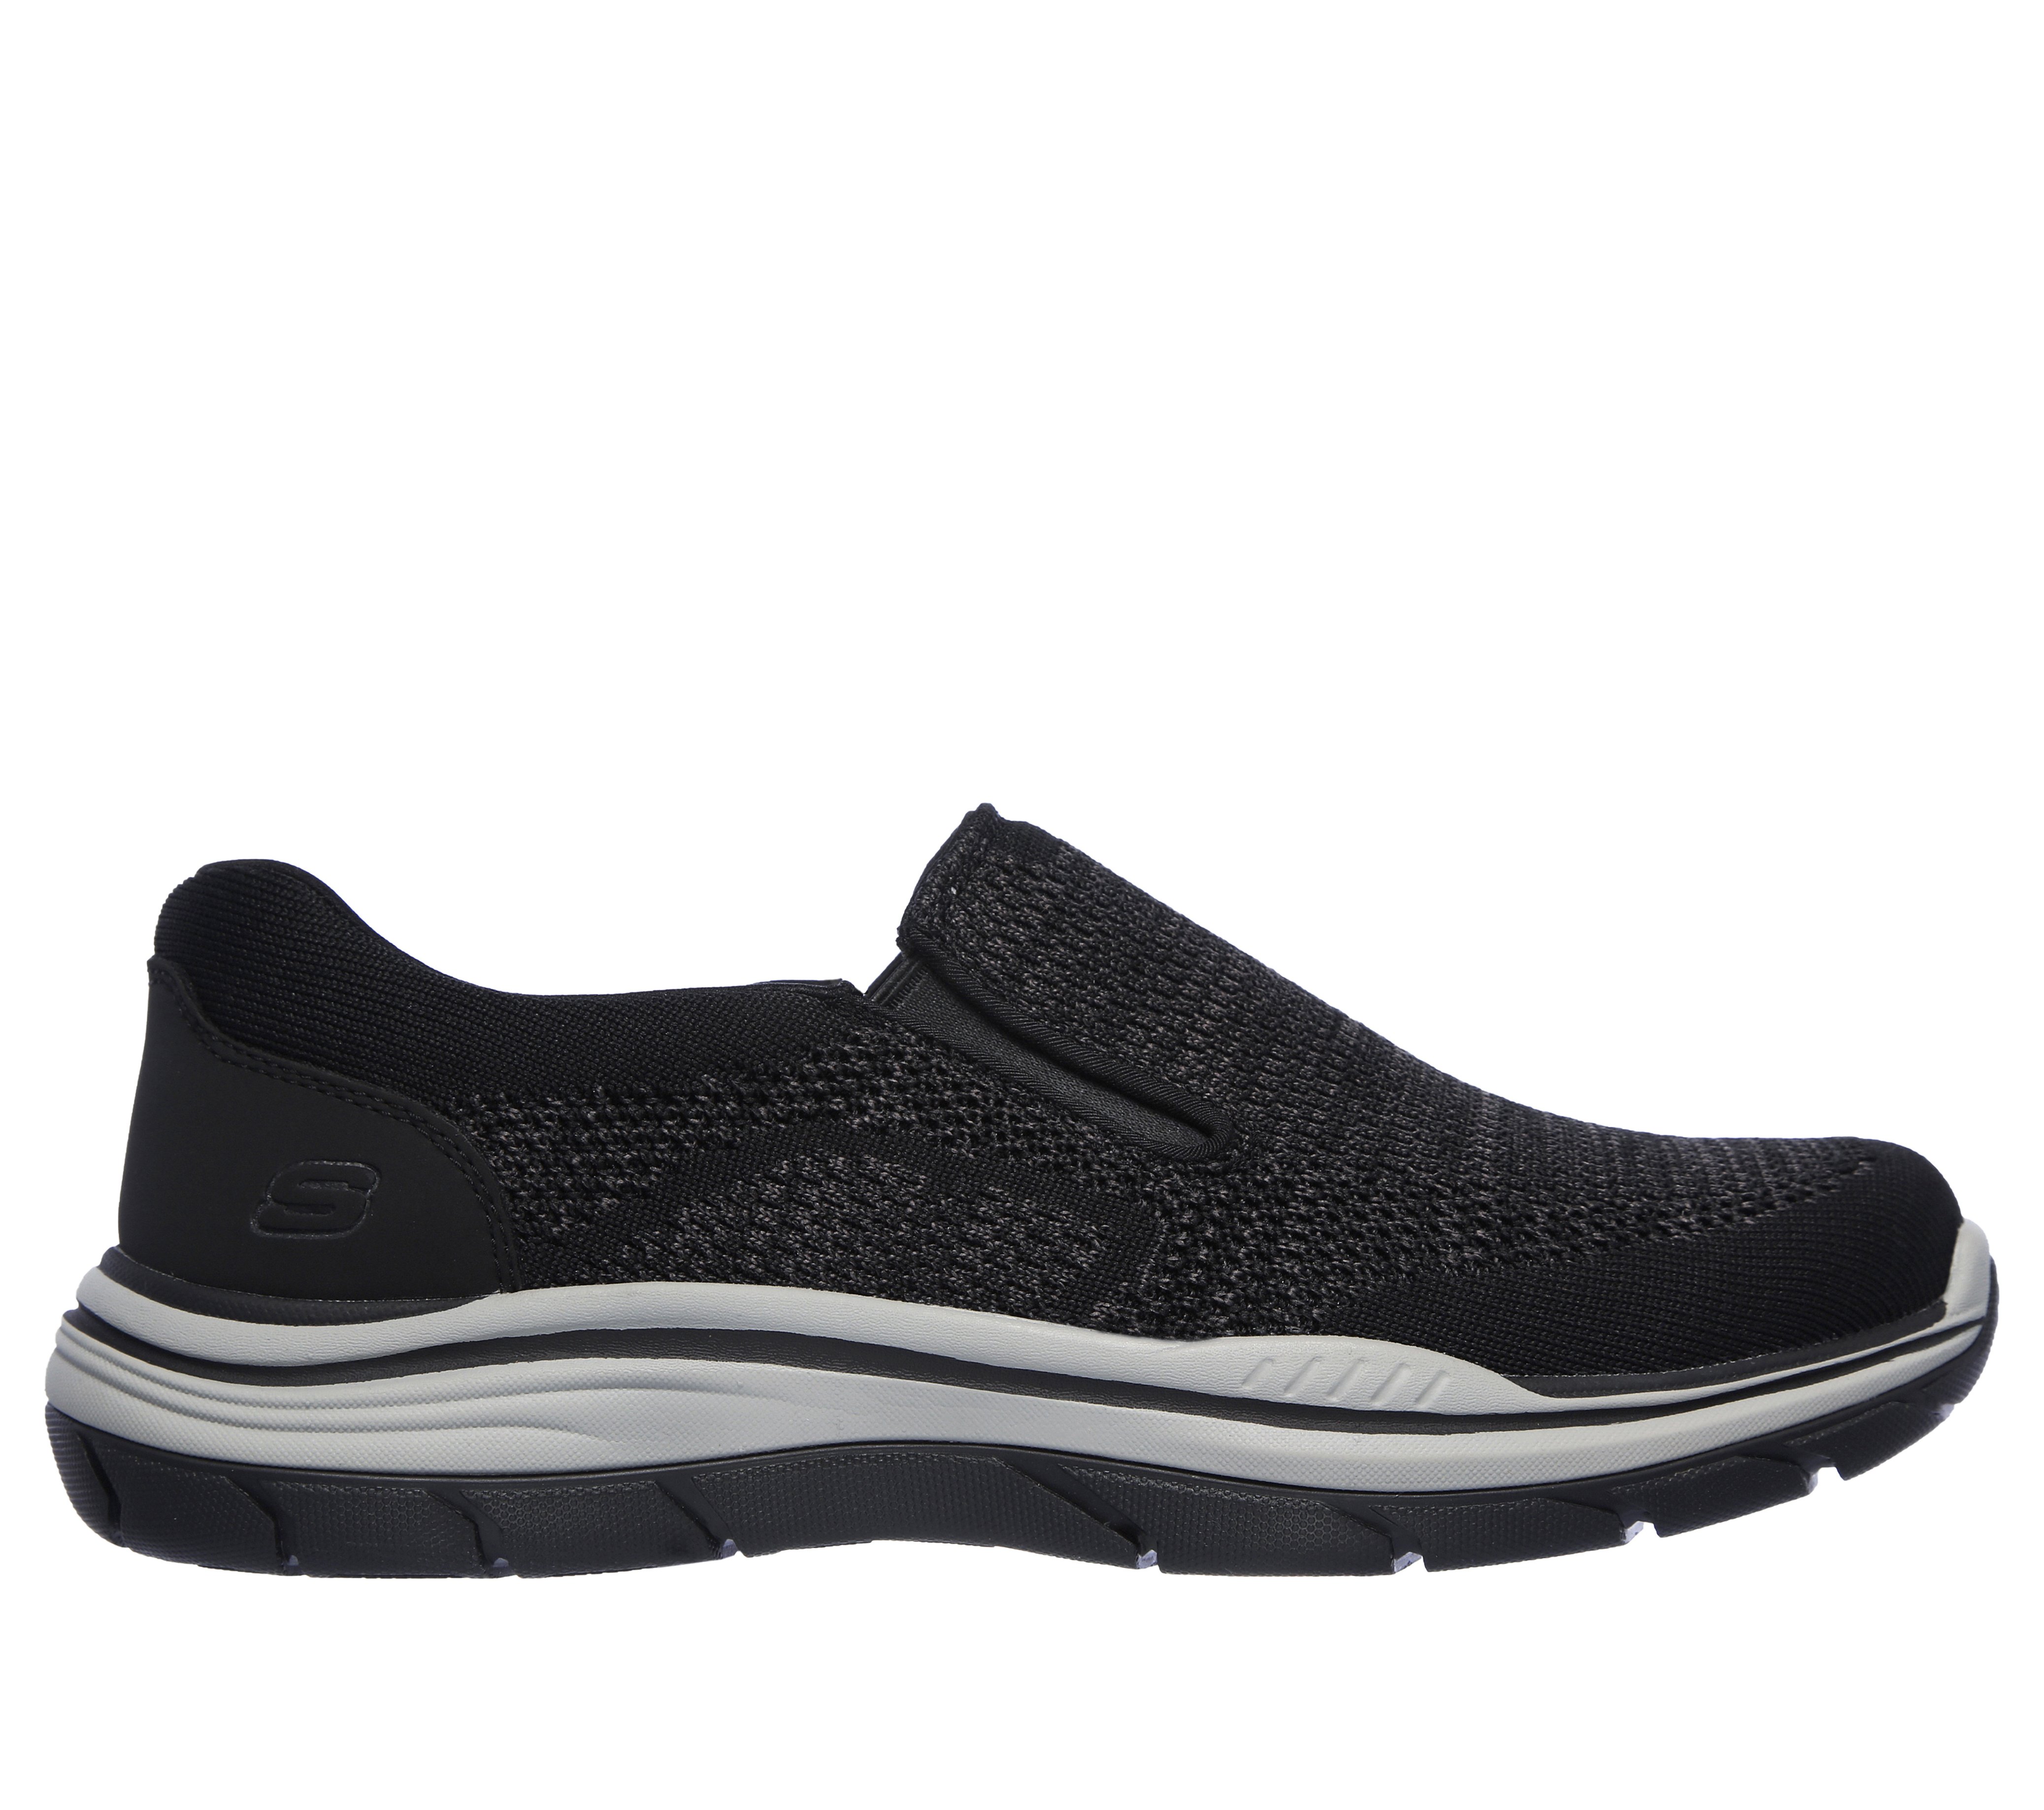 Shop the Relaxed Fit: Expected 2.0 - Arago EXTRA WIDE | SKECHERS